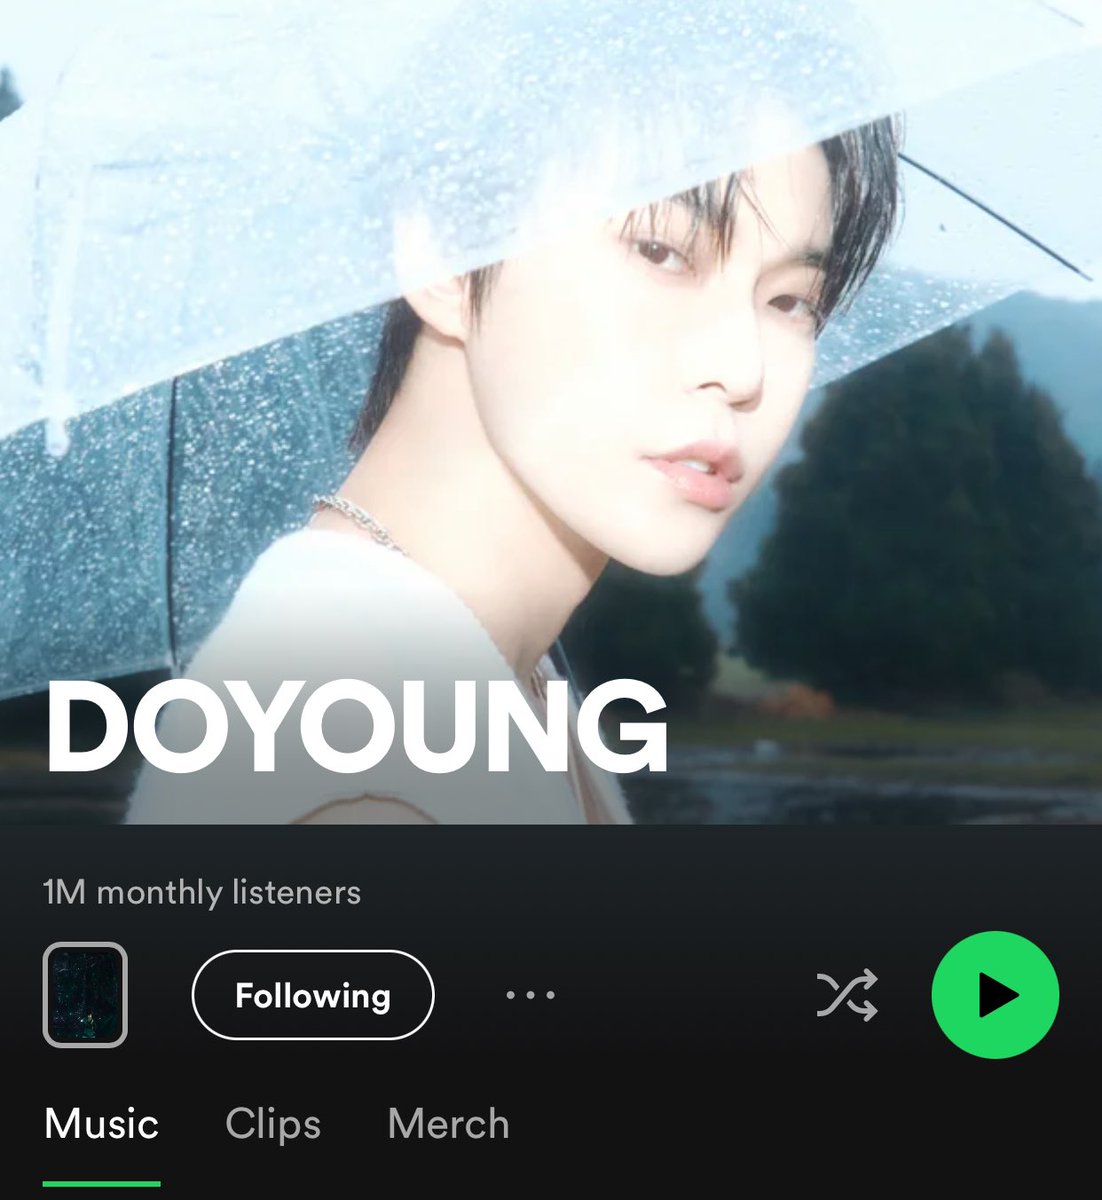 GUESS WHO WAS 1 MILLION MONTHLY LISTENERS??!!